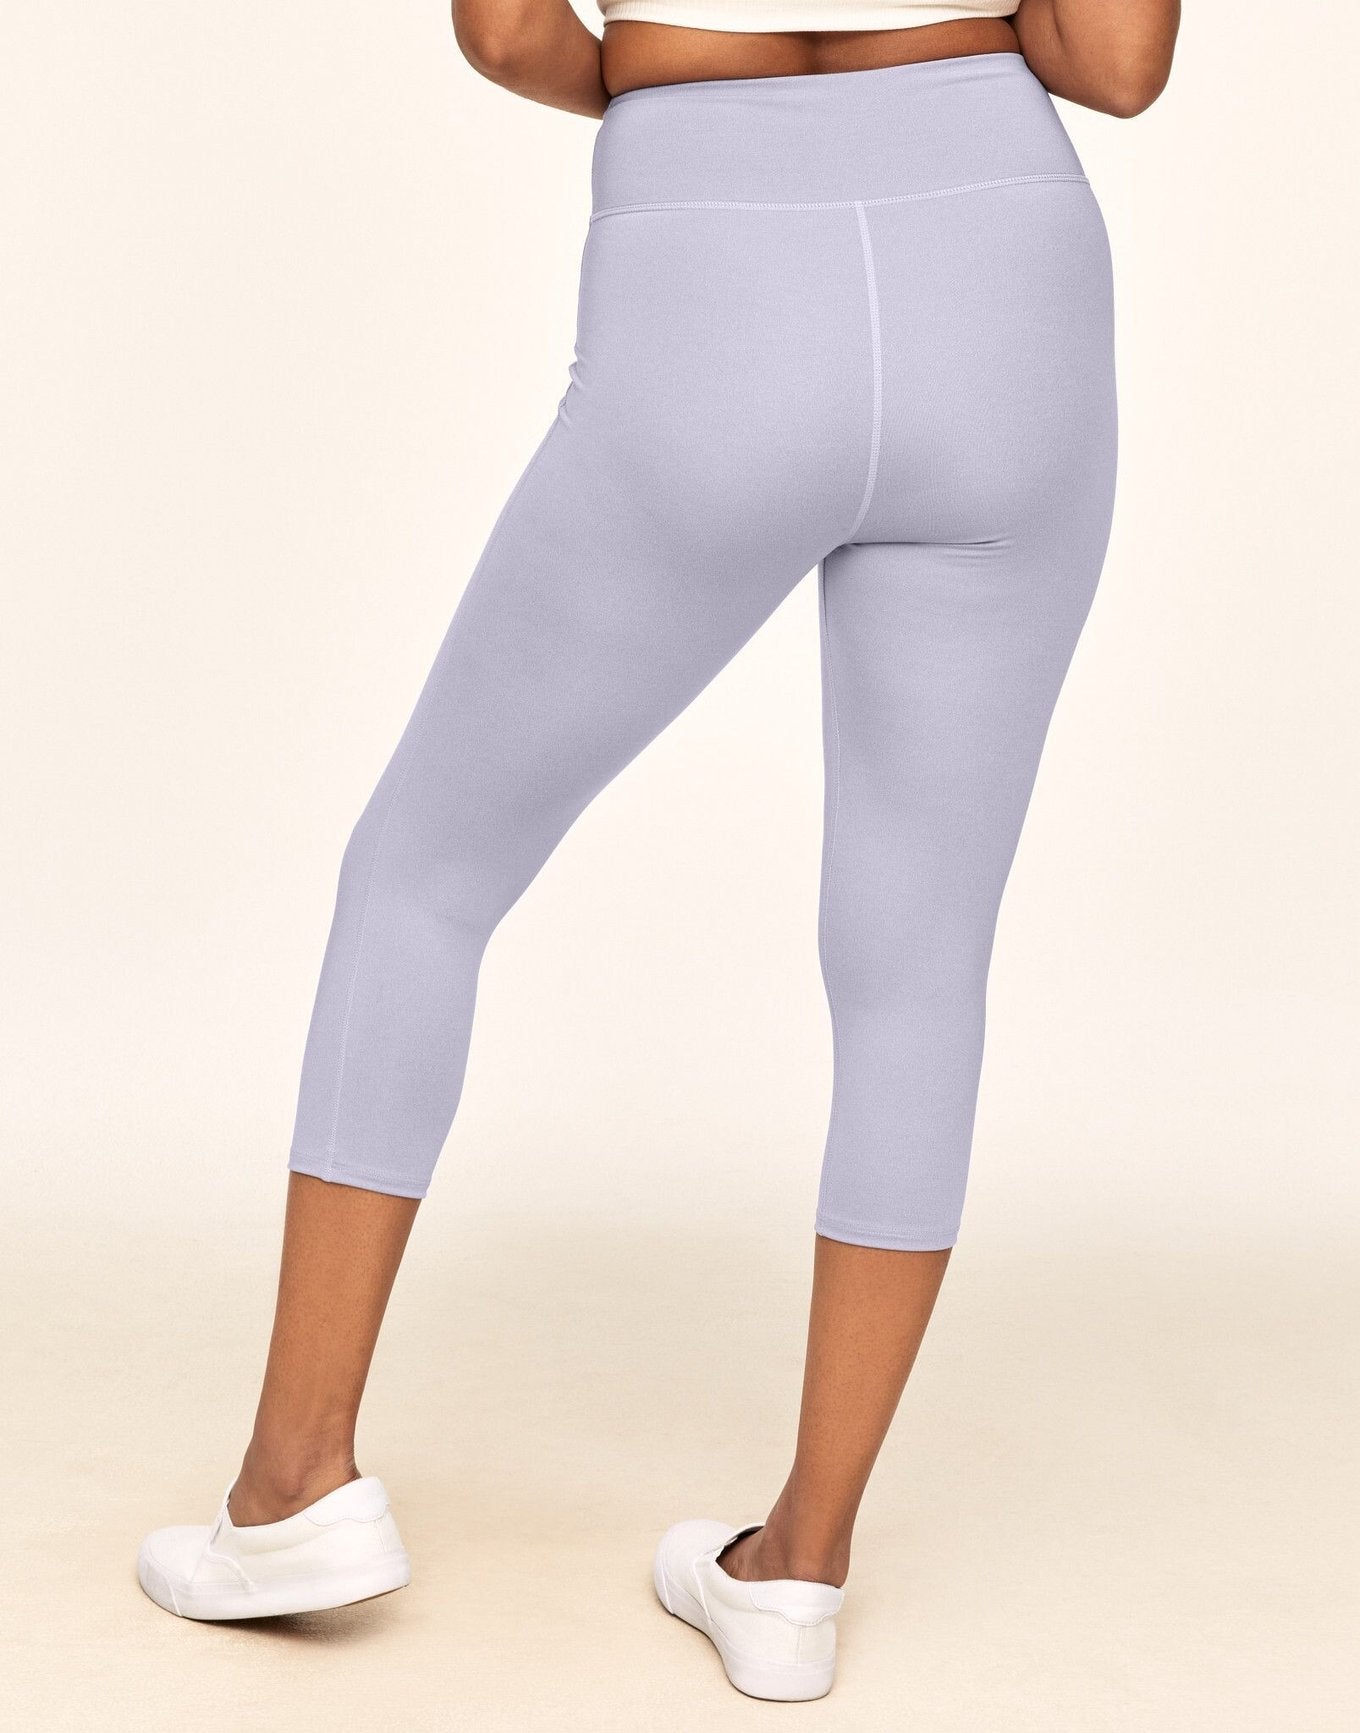 Adore Me Haley Heathered Crop Heather Compression Activewear Crop Legging in color Lavender Blue Heather and shape legging